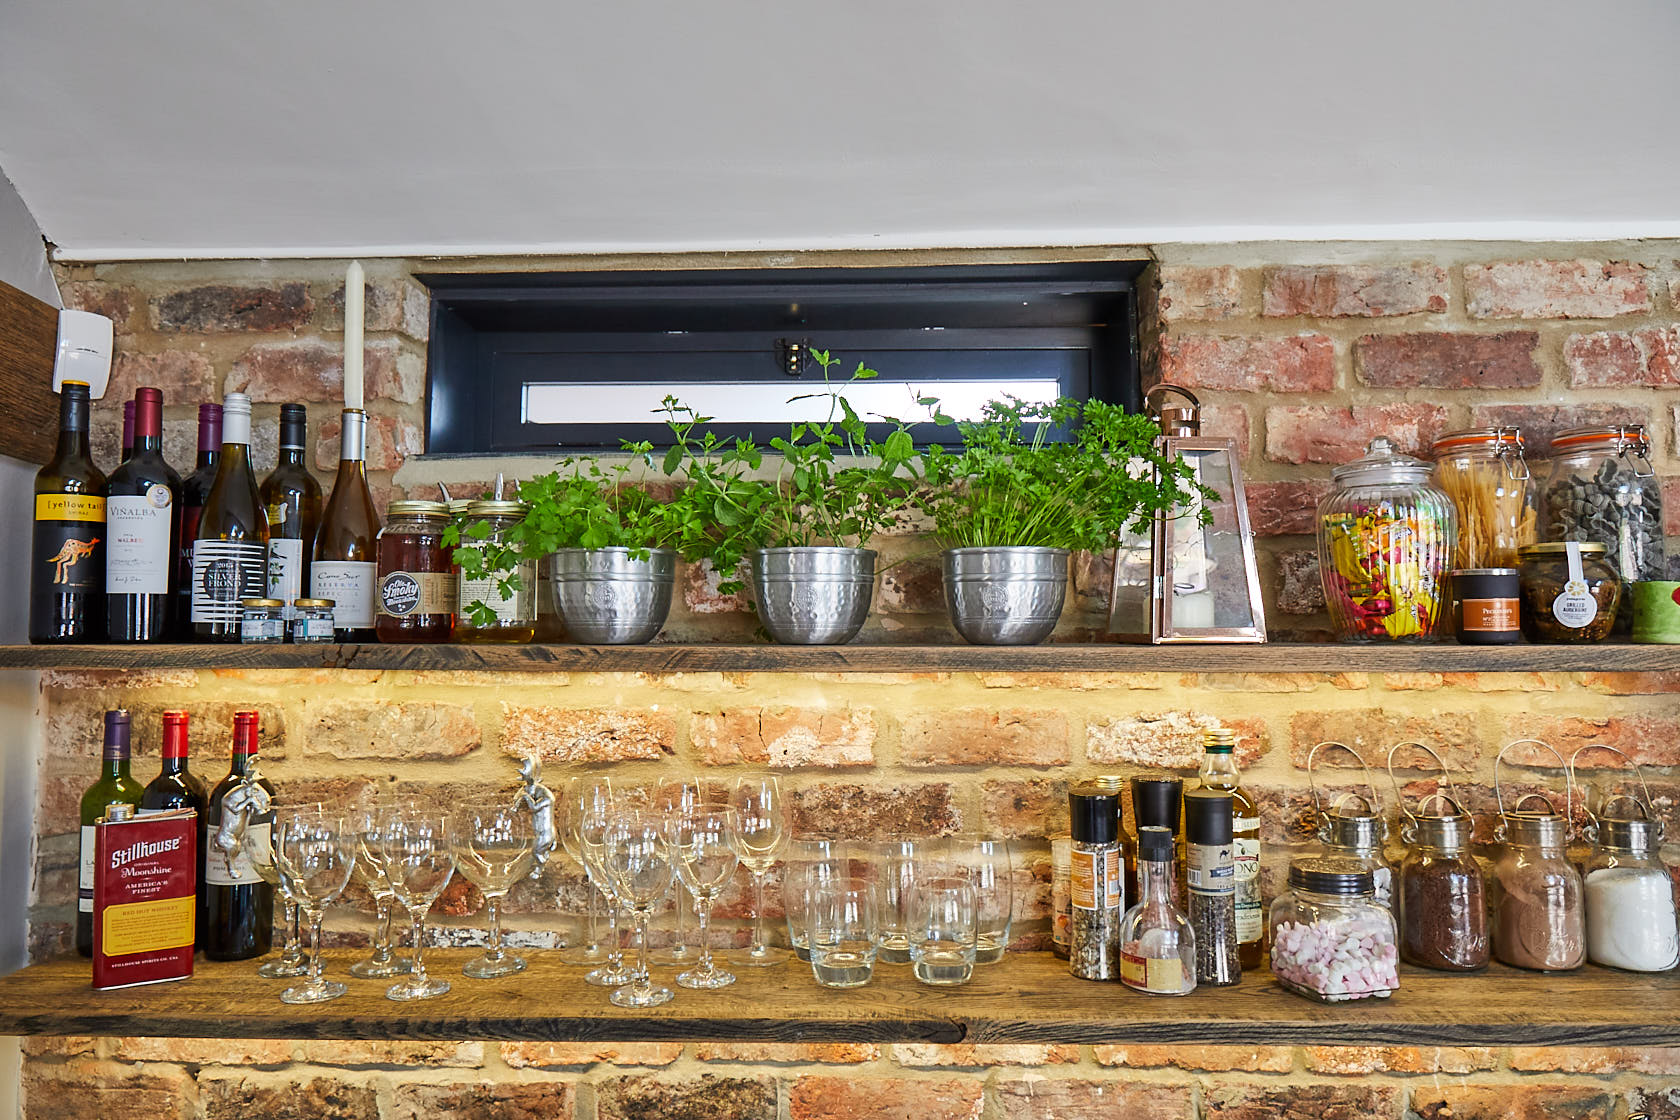 Rustic oak shelves with herbs on and exposed brick wall backdrop